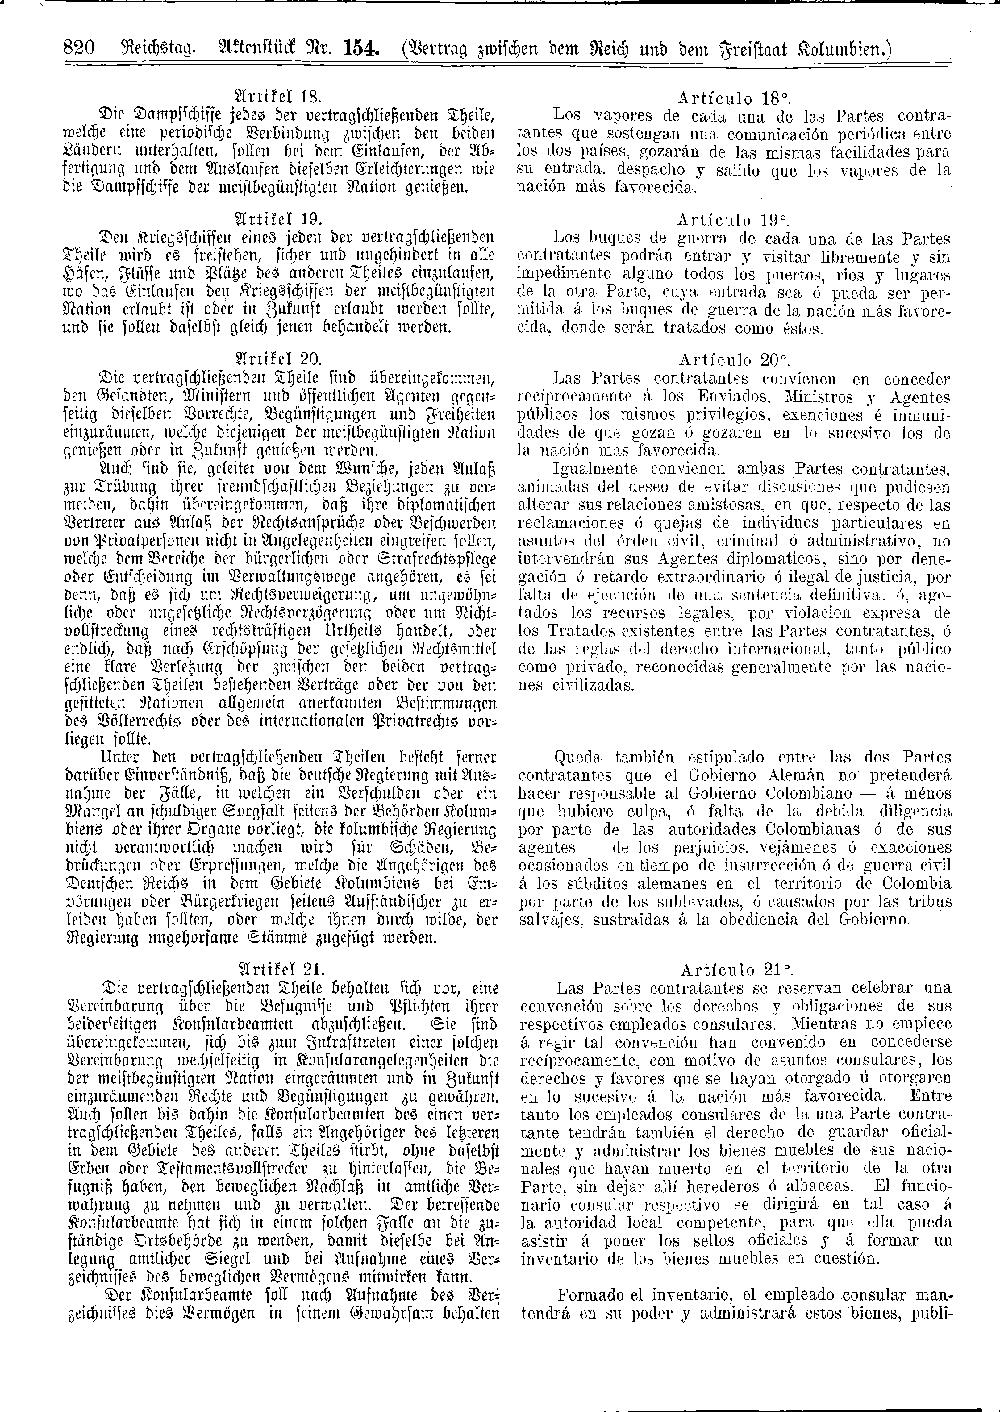 Scan of page 820